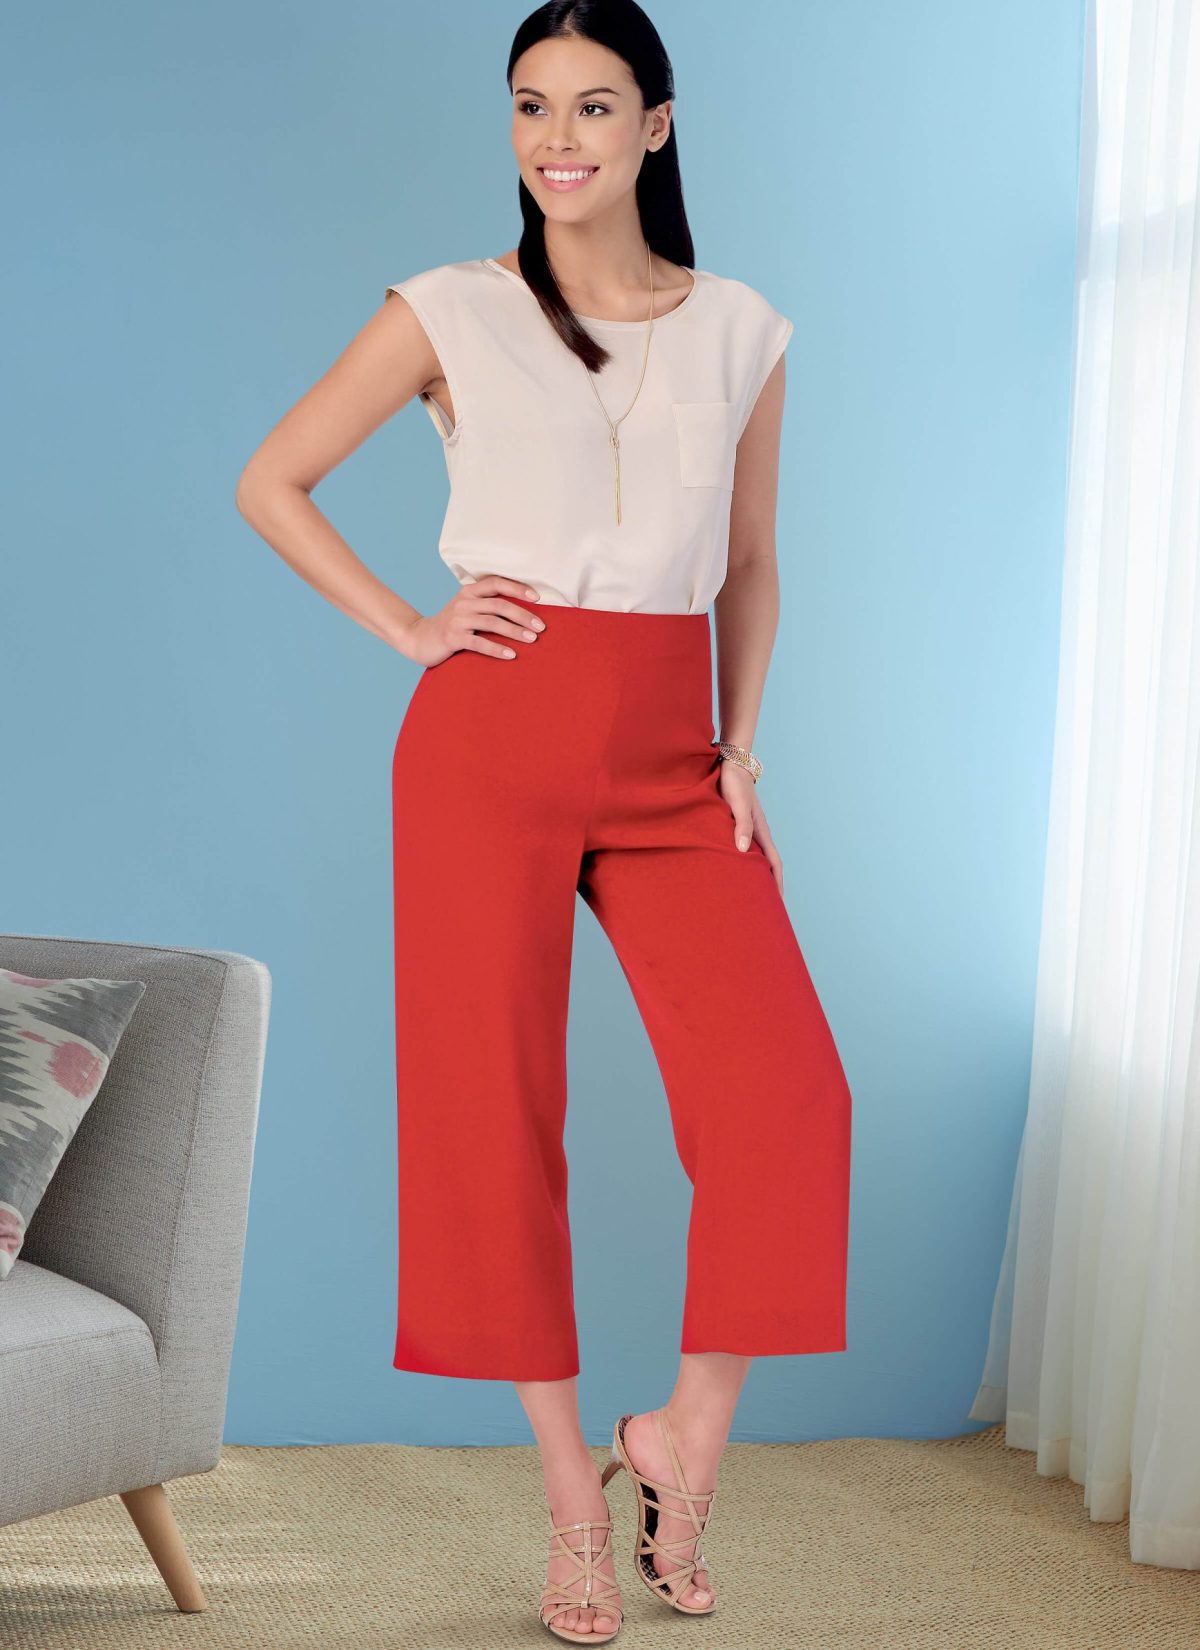 Butterick Sewing Pattern B6851 Misses' No-Side-Seam Shorts, Capris &  Trousers Palmer/Pletsch - Sewdirect